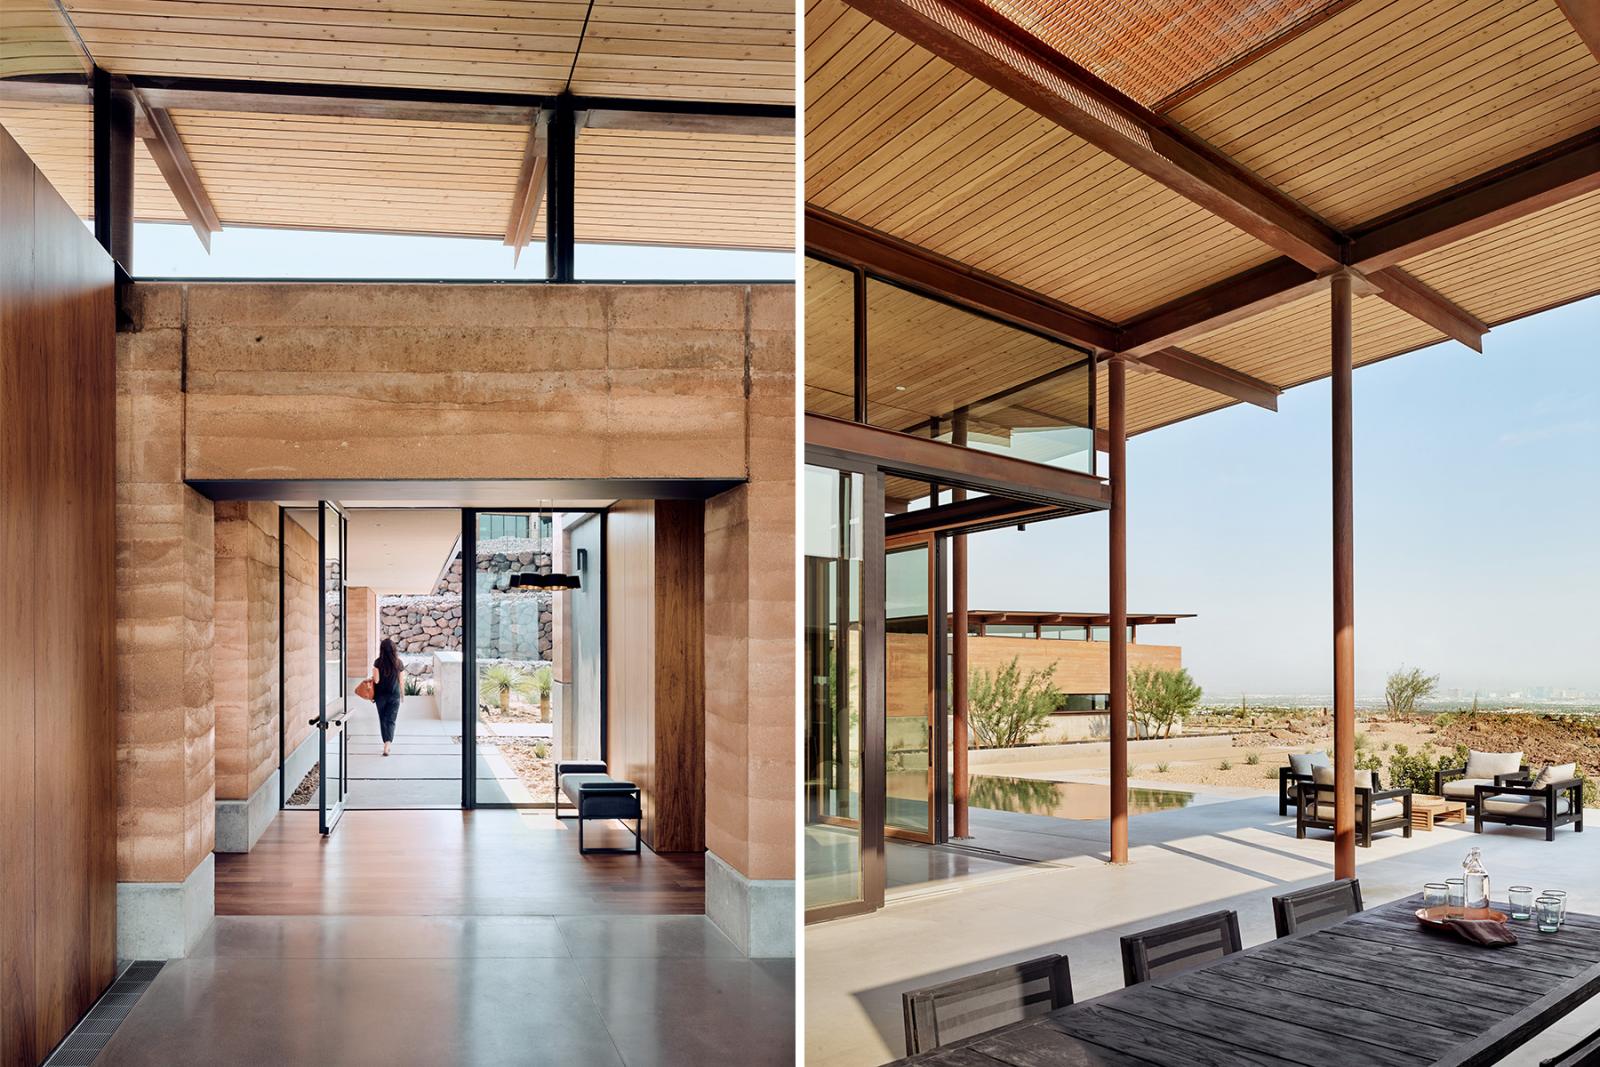 The home’s textures, colors and materials blend seamlessly with the surrounding desert. 